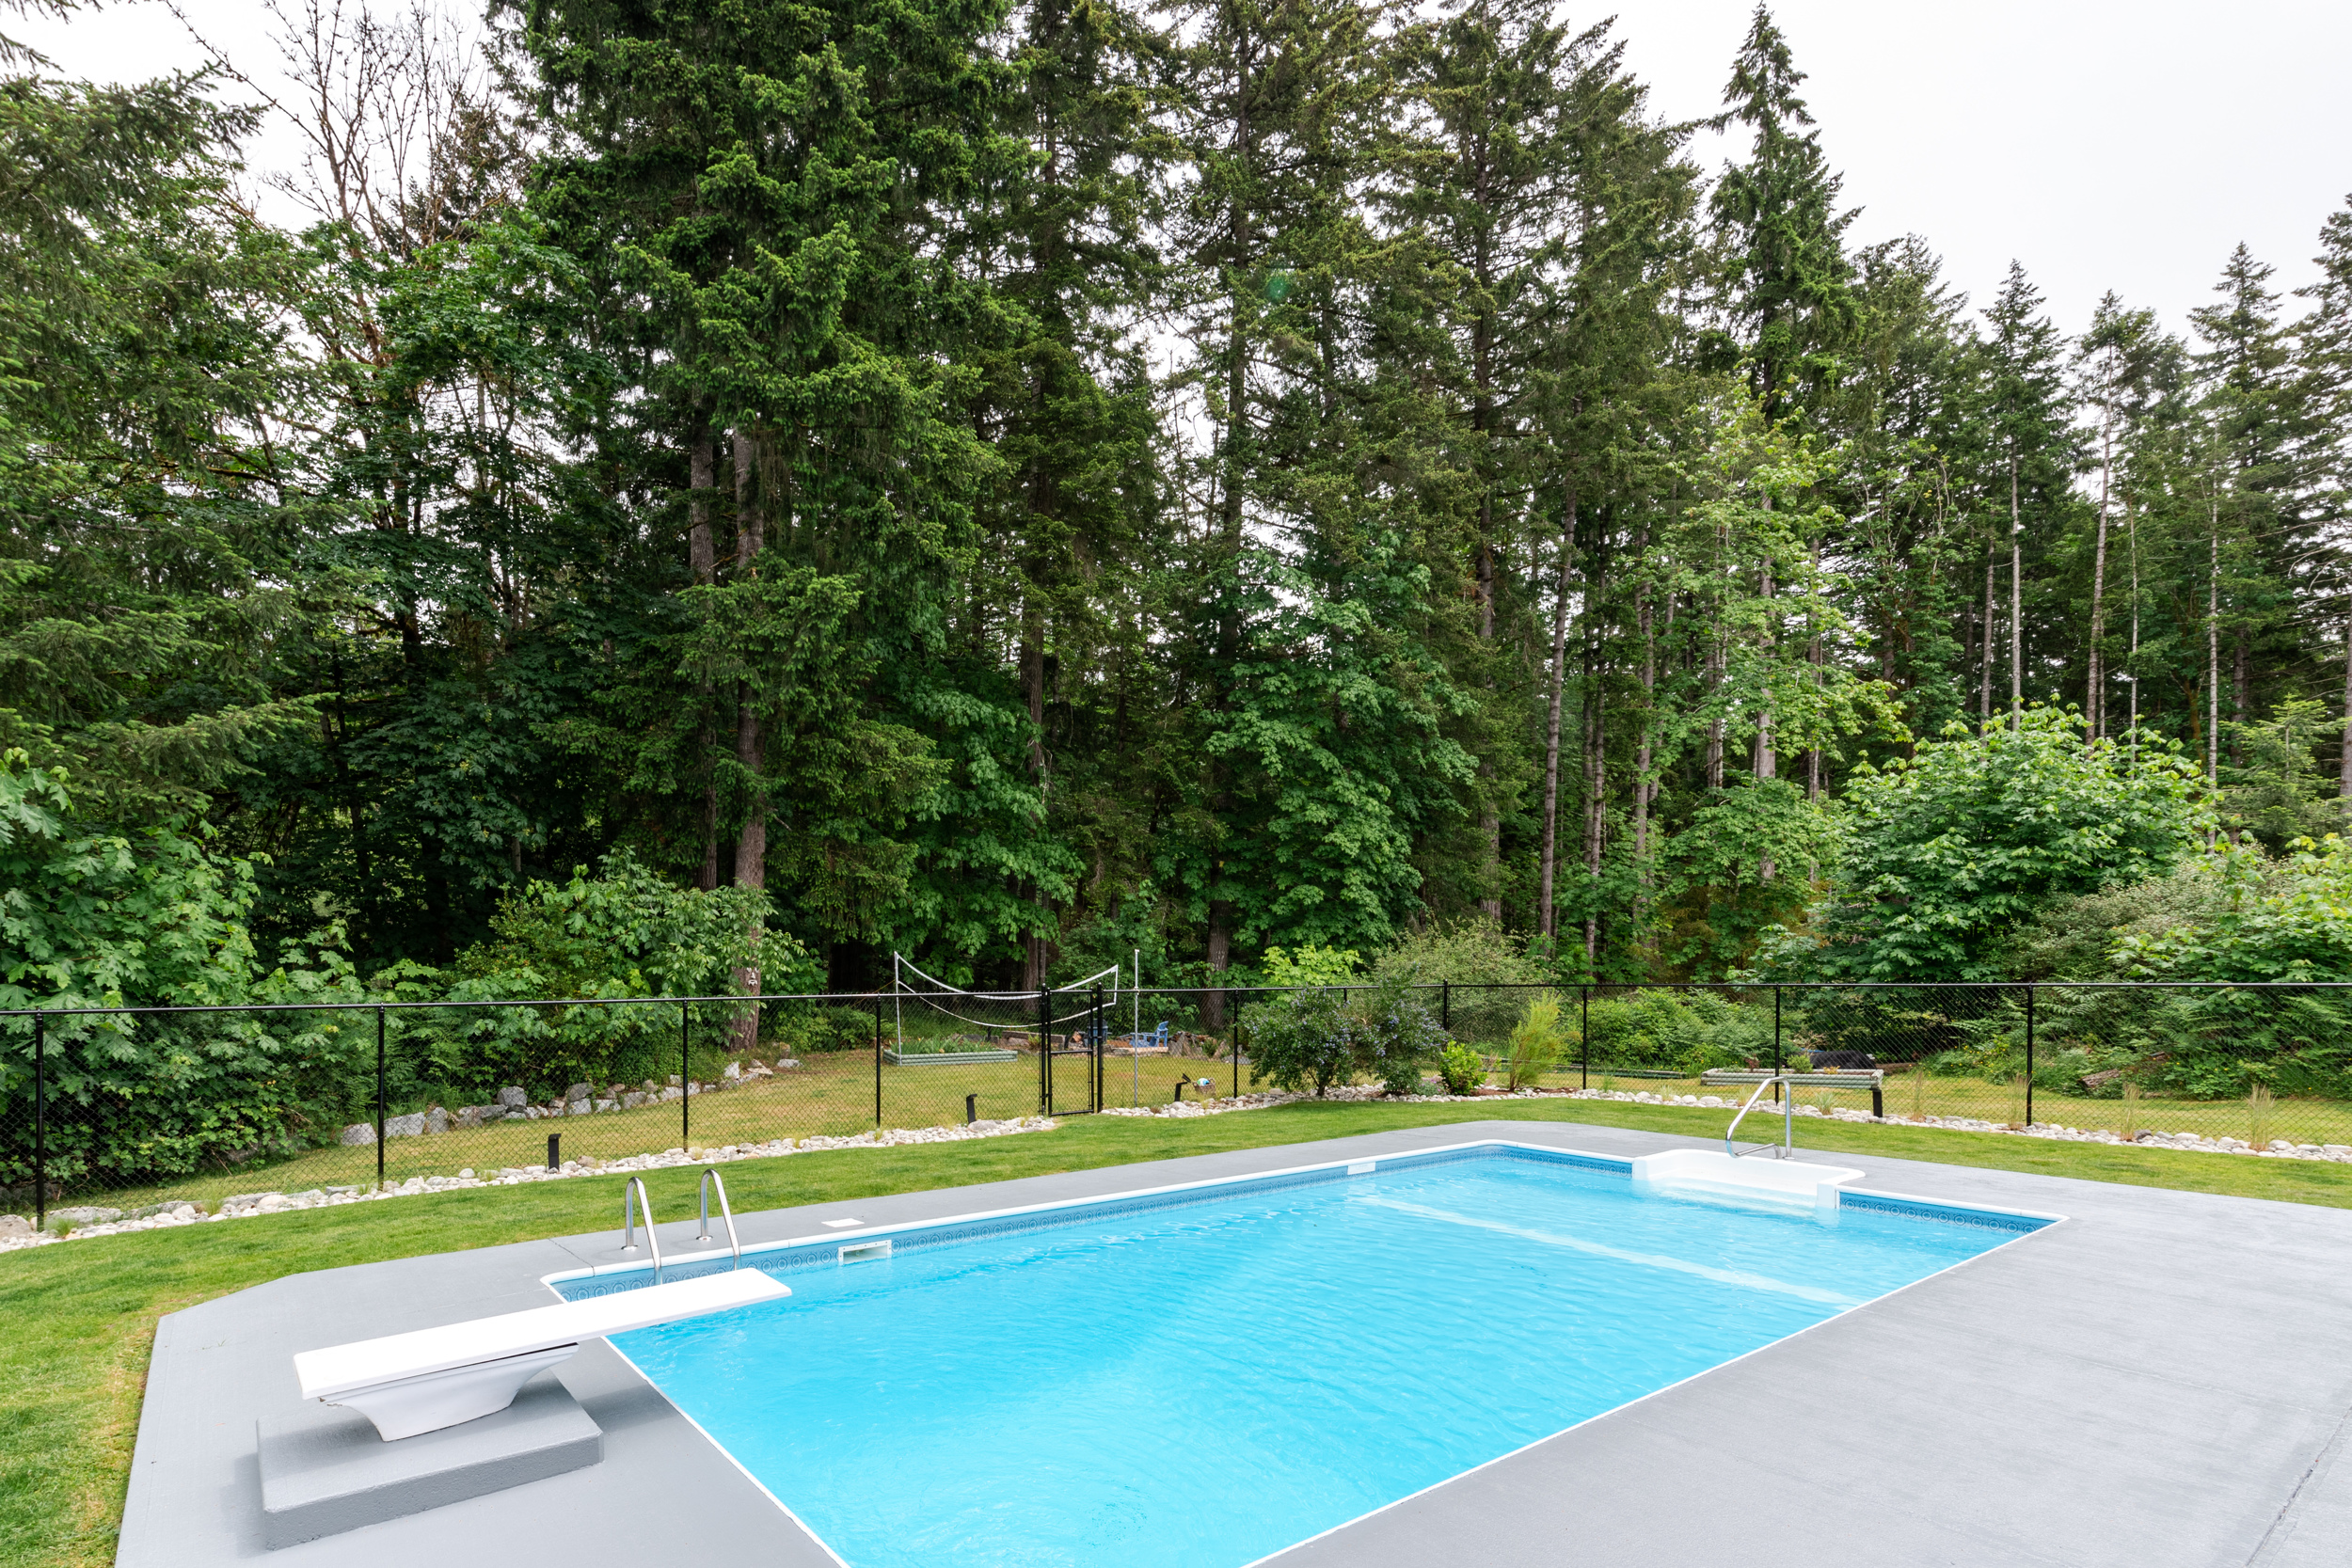 an in-ground swimming pool in a backyard with grey painted concrete pool deck and a forest in the backdrop